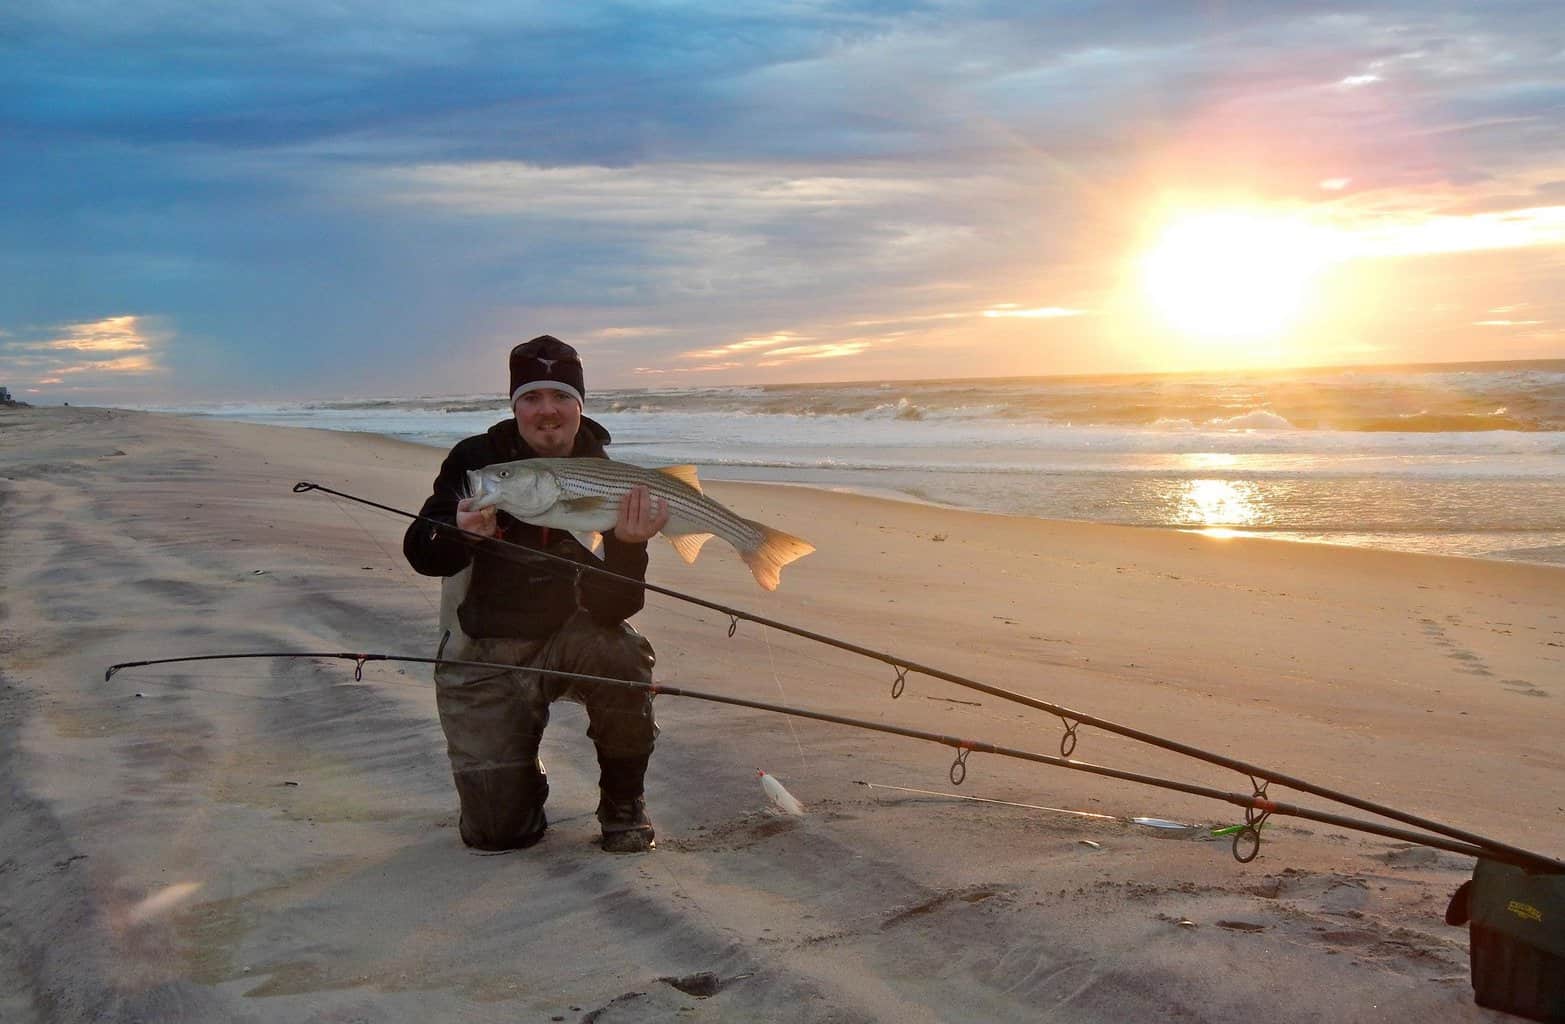 An angler holds up a large striped bass caught fishing on a New York beach, with the sun setting over the surf in the background.